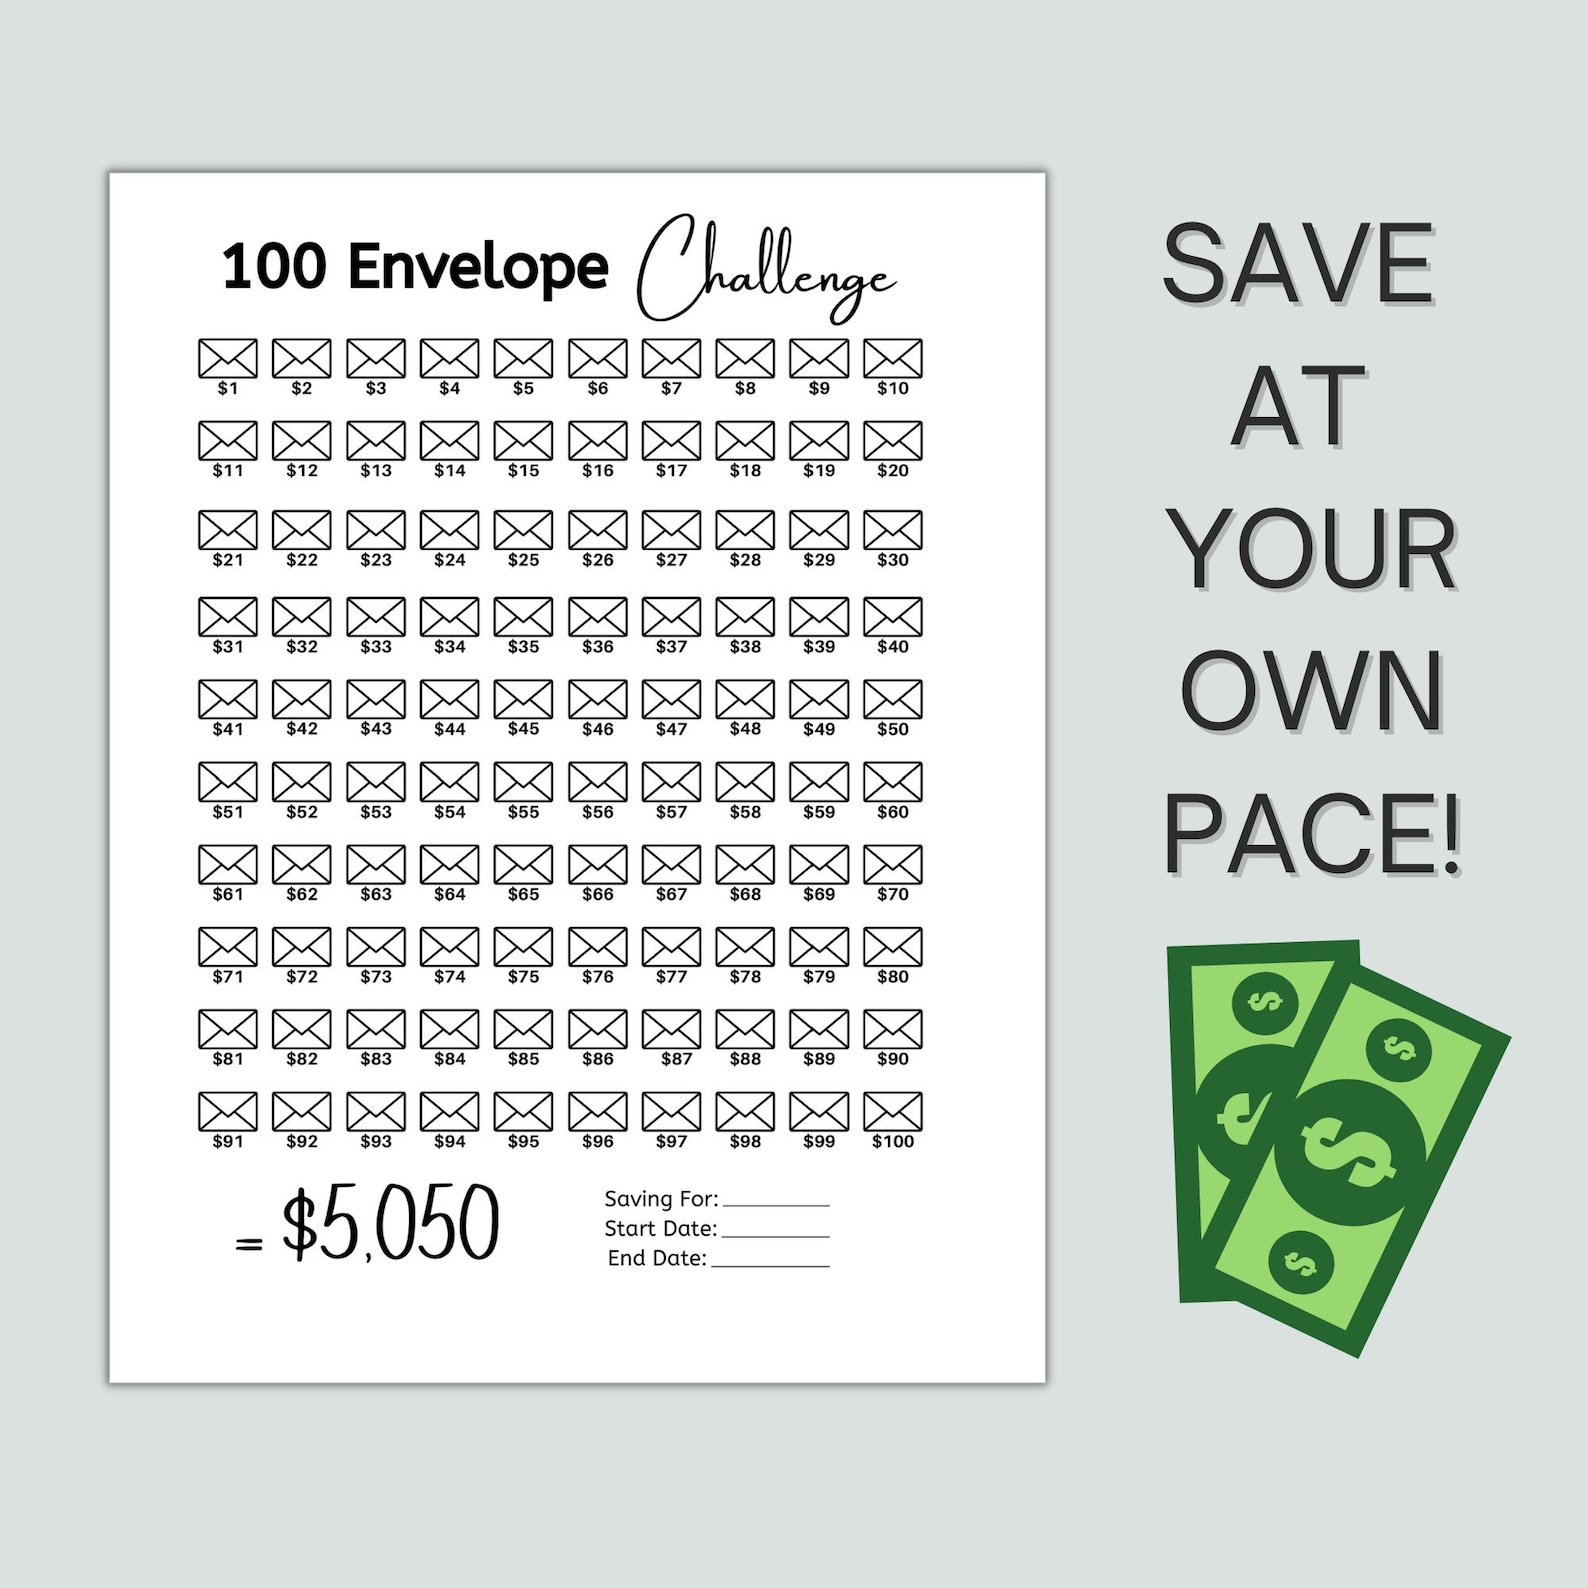 How Much Do You Save Doing The 100 Envelope Challenge